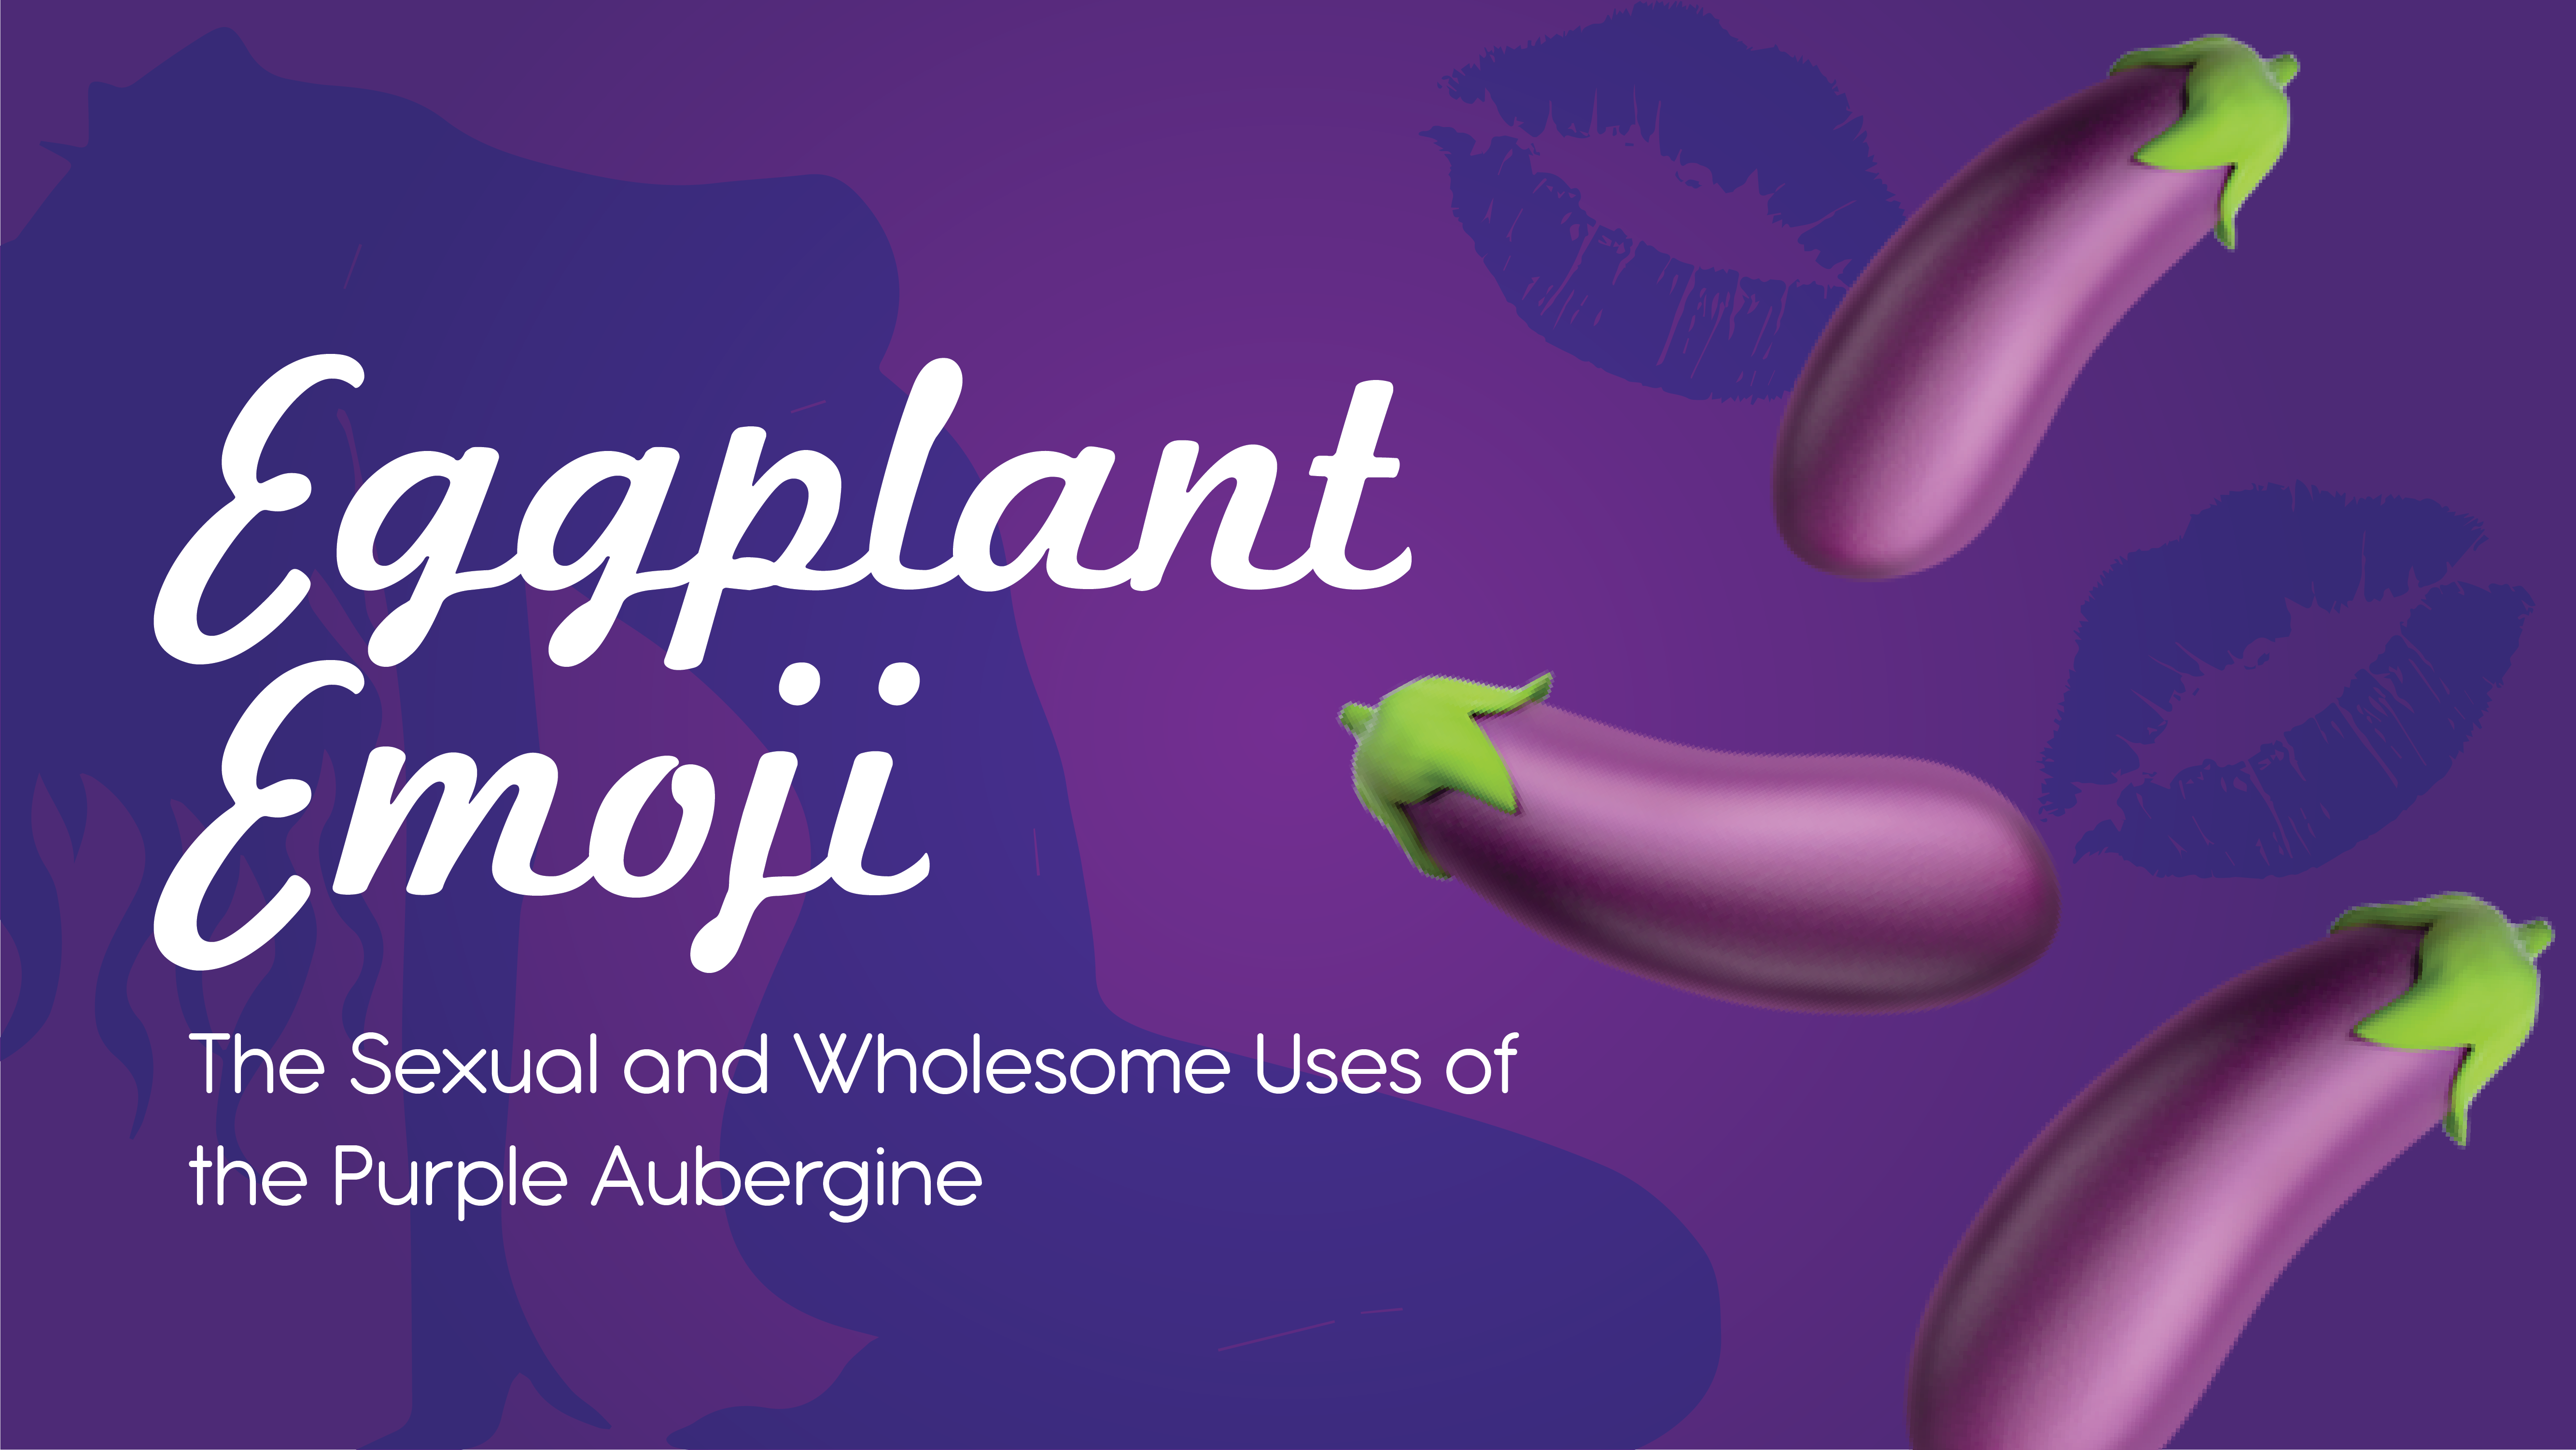 Gotta Give The Eggplant An Oscar For Its Very Sensual